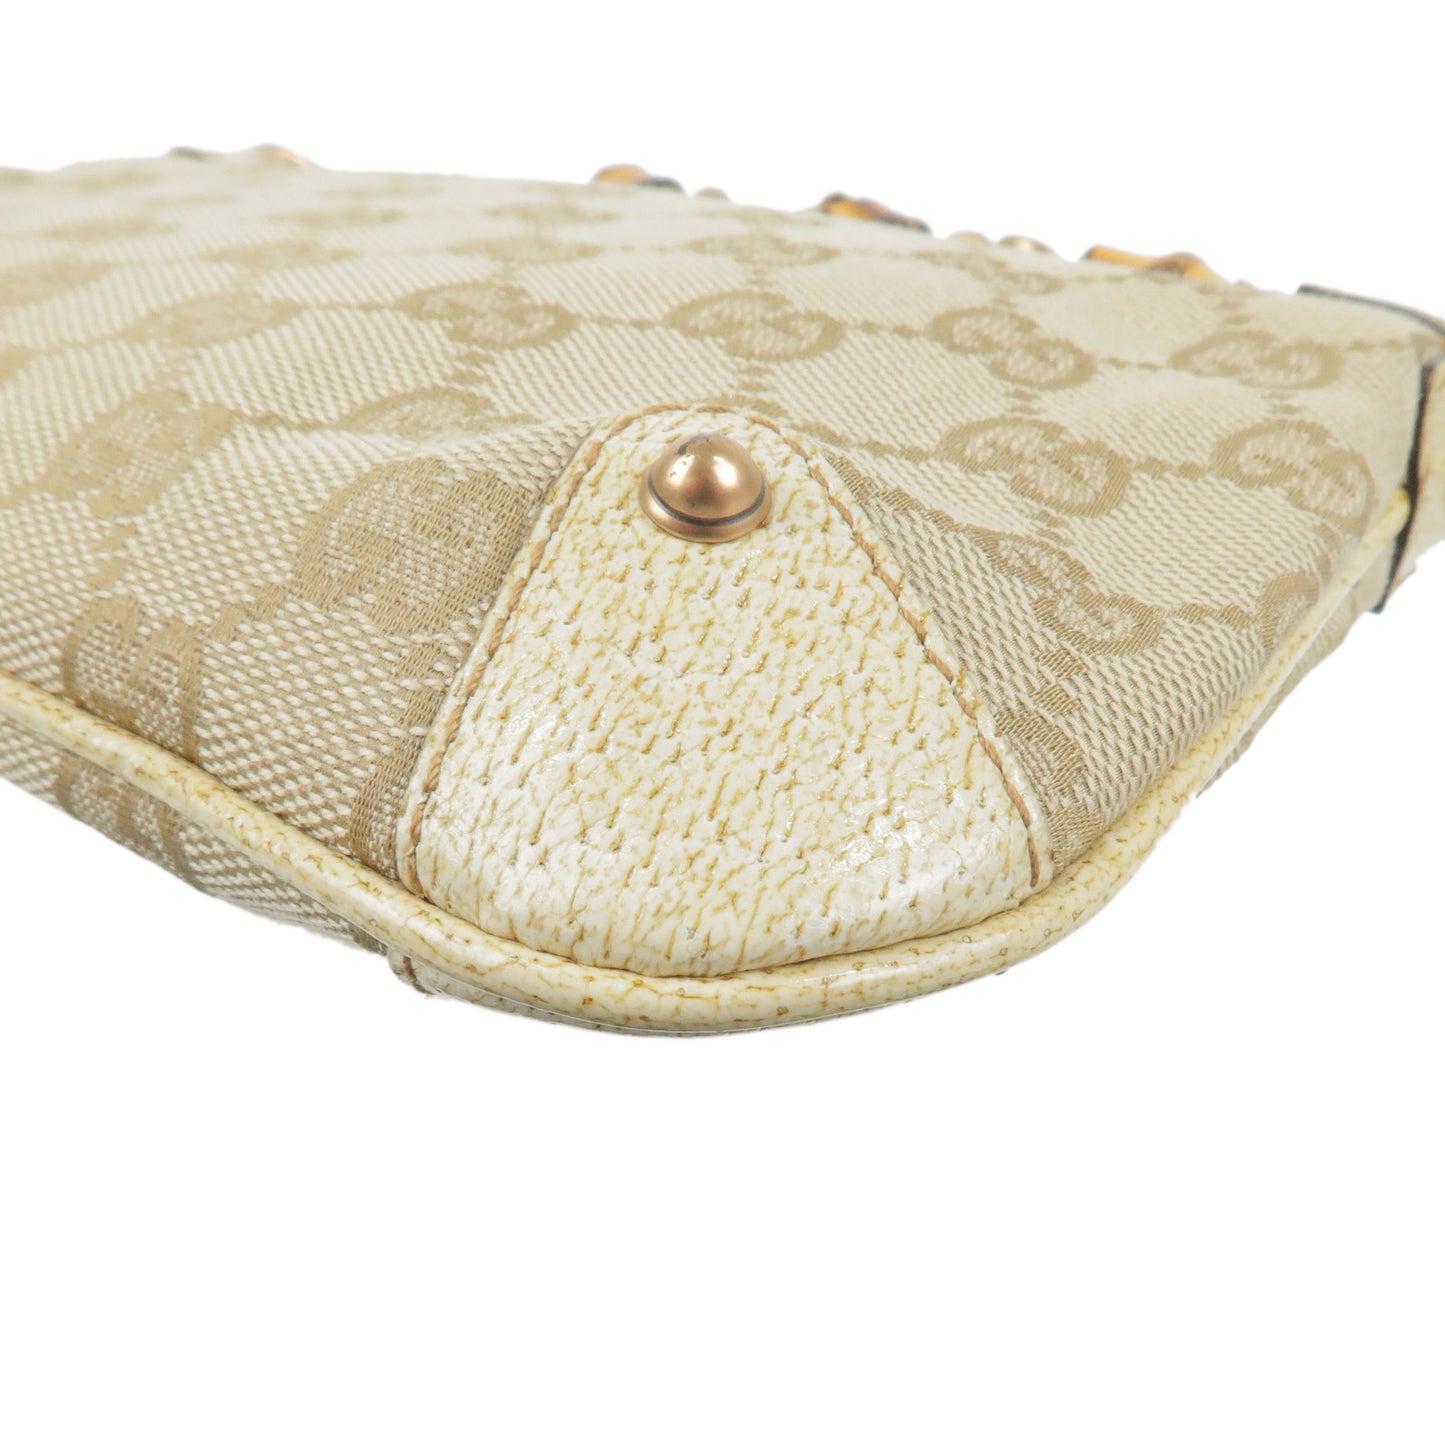 GUCCI Bamboo GG Canvas Leather Pouch Purse Beige Ivory 124289